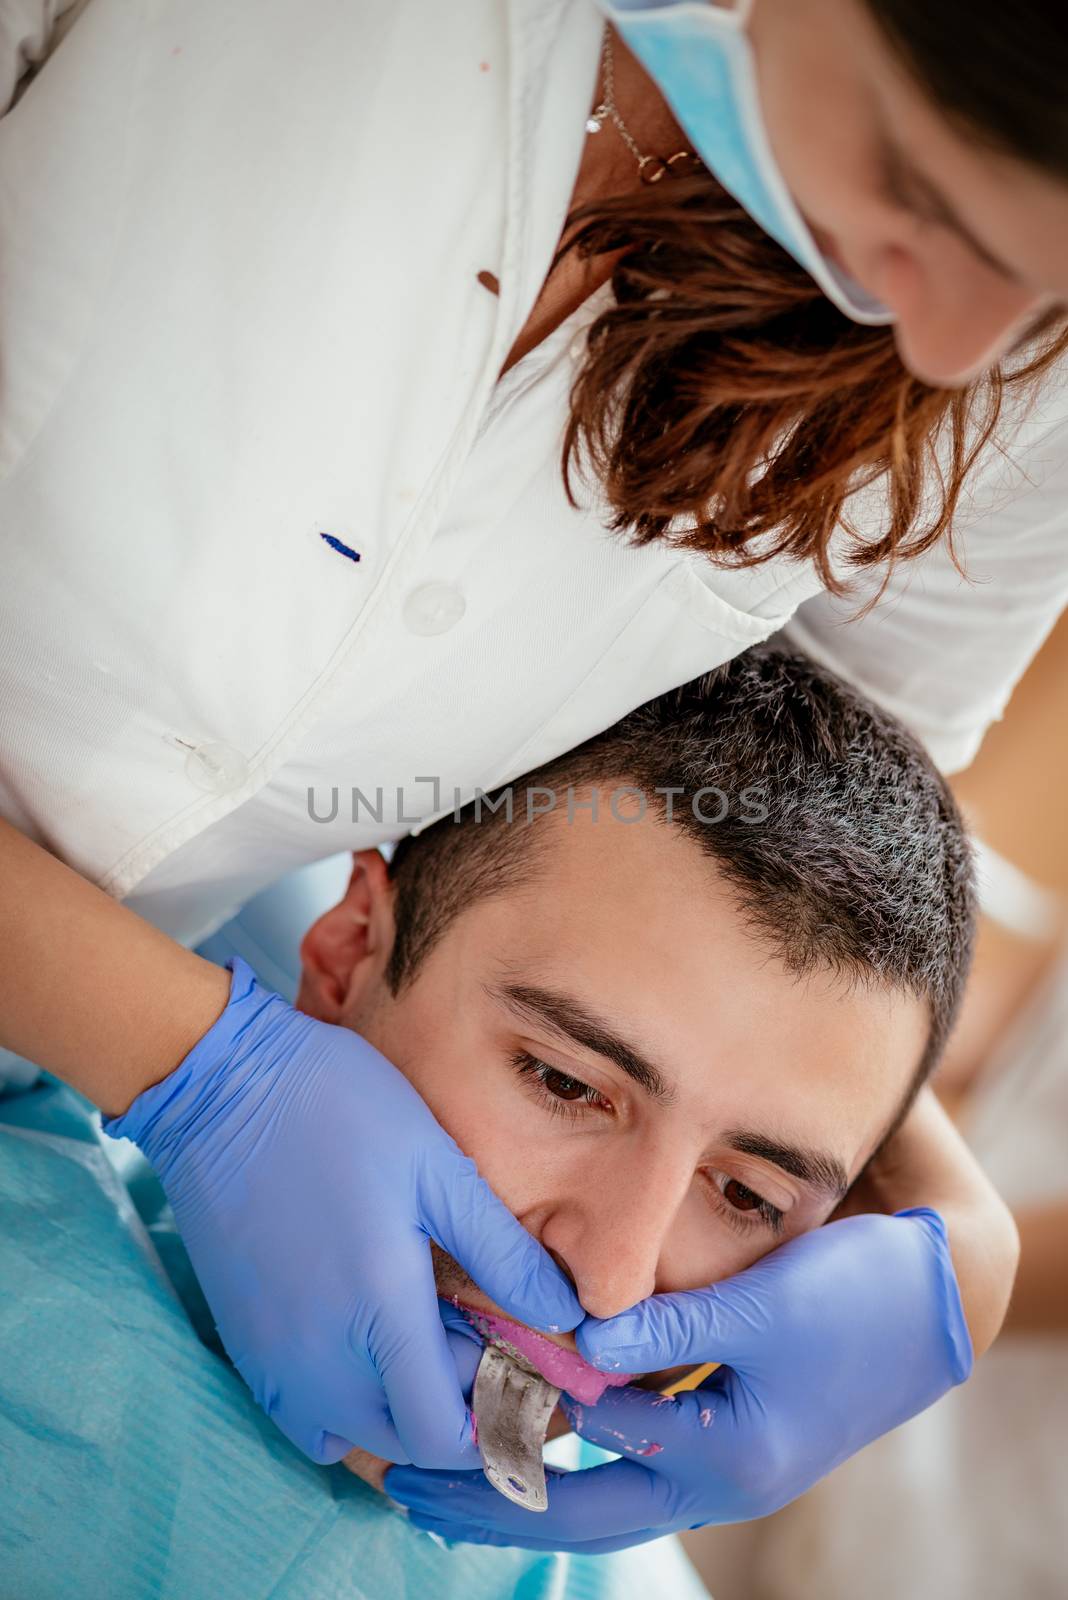 Dentist using dental impression for braces to the male patient. Real people.